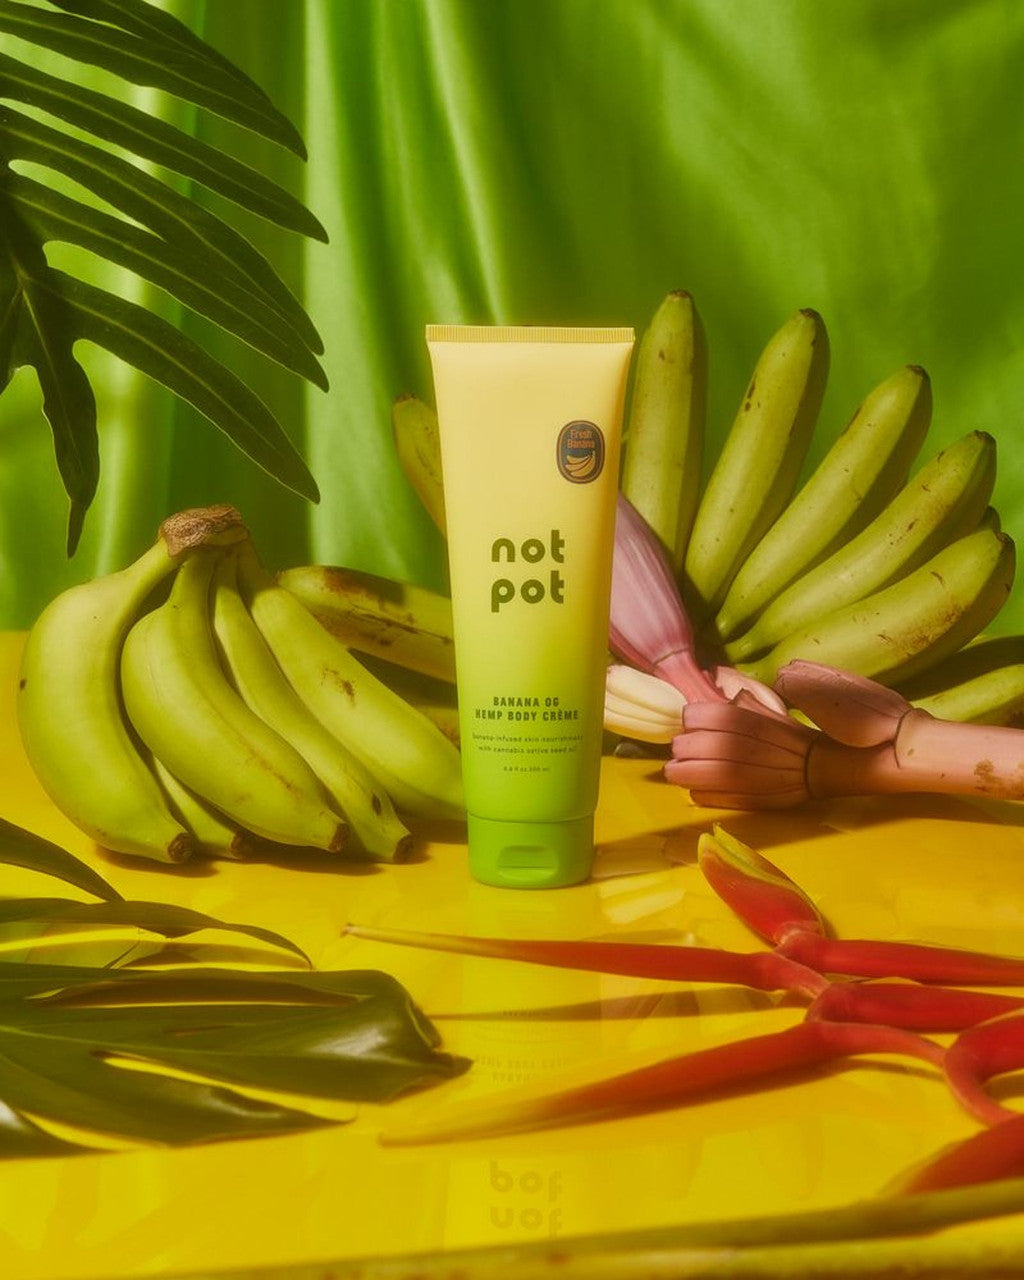 Tube of Not pot Bannana lotion sitting on table surrounded by bananas